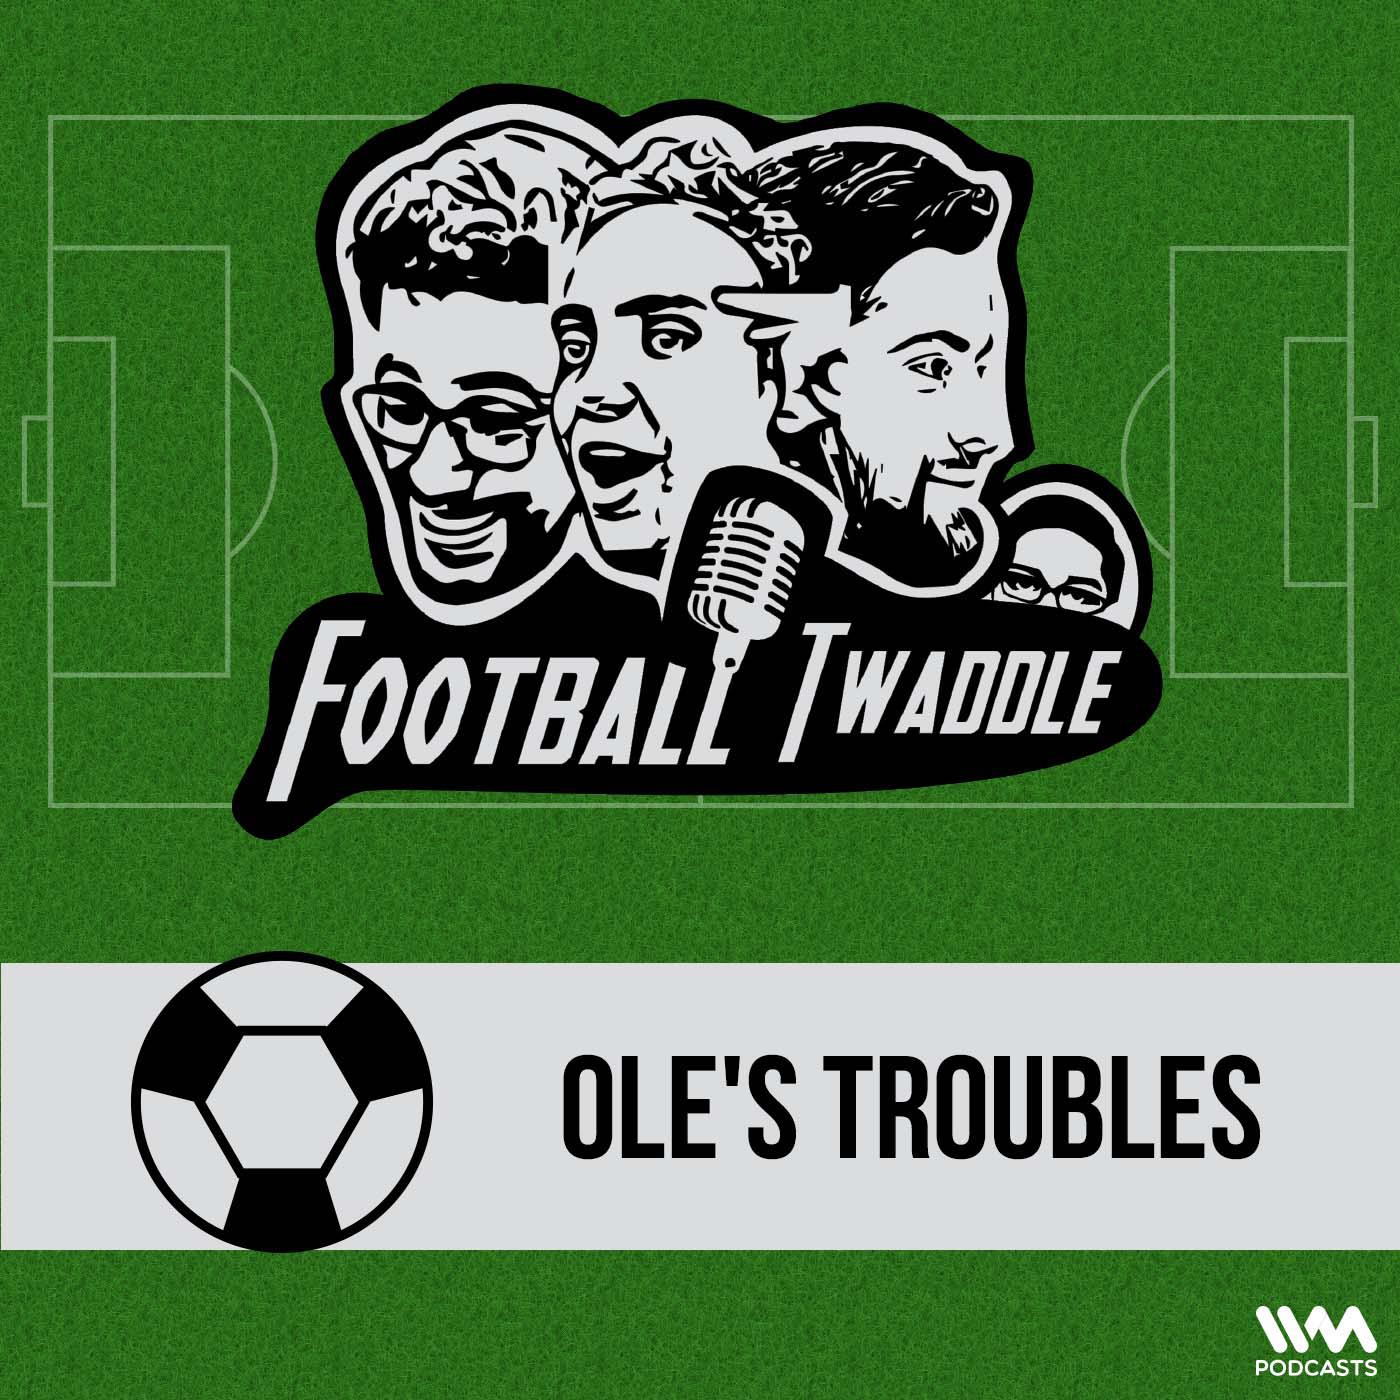 Ole's Troubles